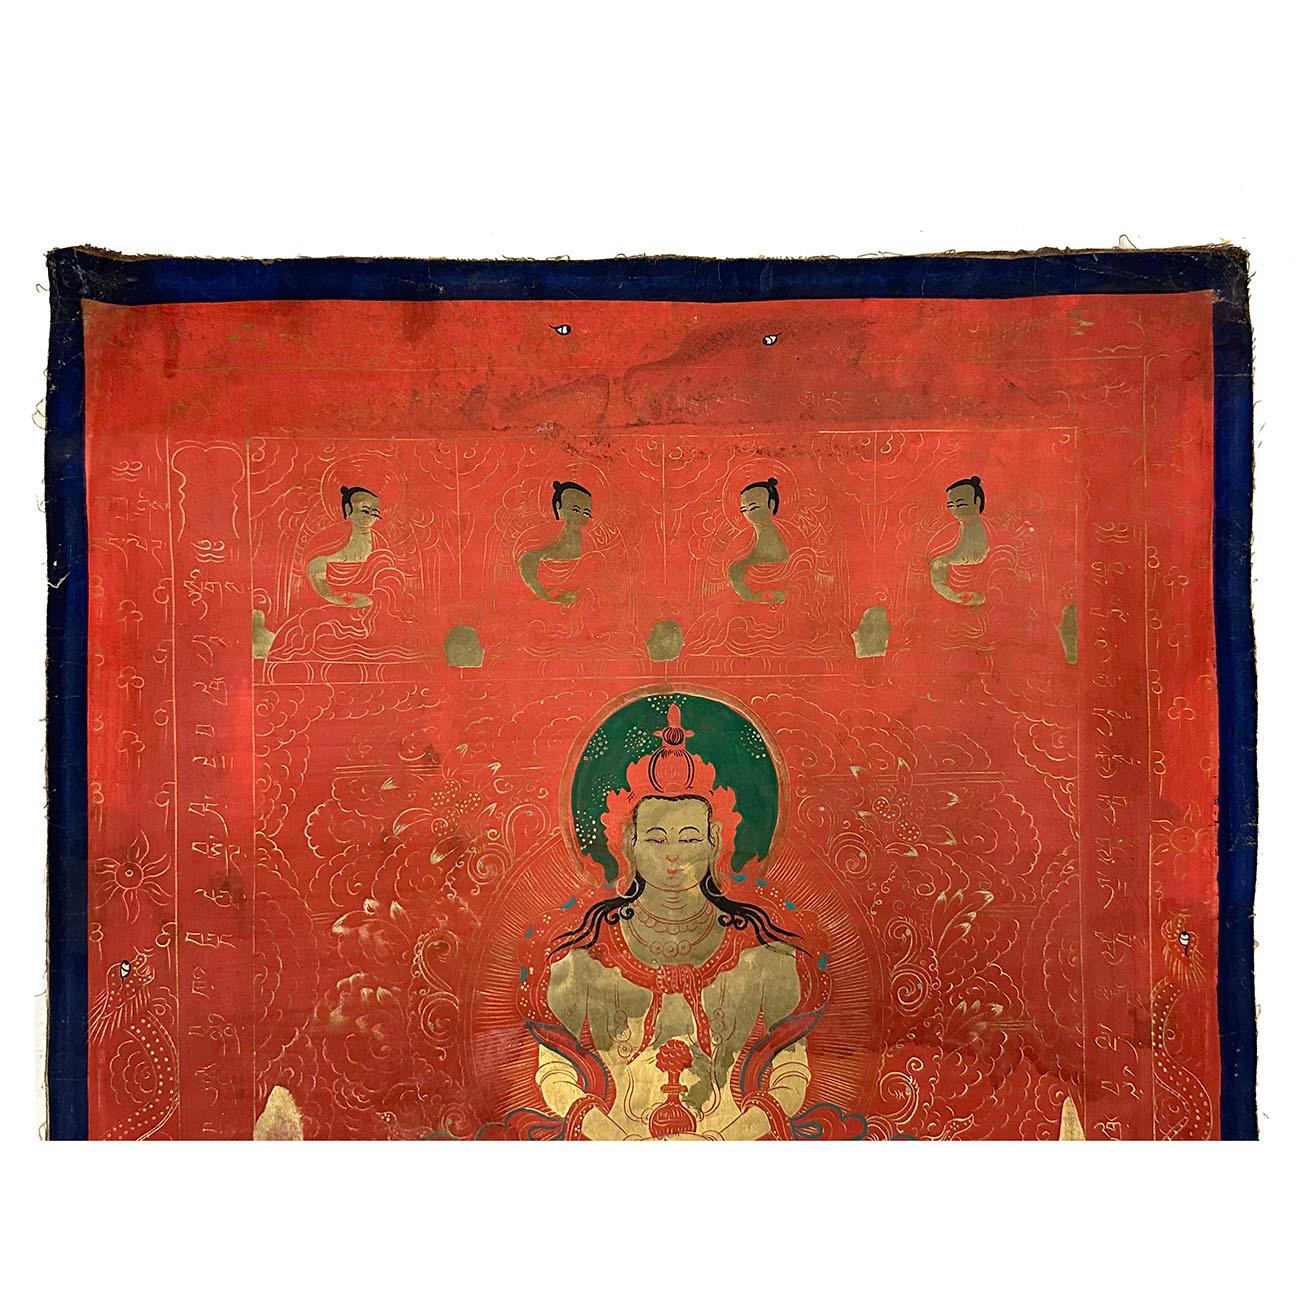 Maitreya (Tibetan: cham pa. English: Love), the Bodhisattva of loving kindness and the coming Buddha of the future aeon - currently residing in the Tacitus heaven.
Beautiful and peaceful, This authentic Tibetan Thangka finely painted with colored